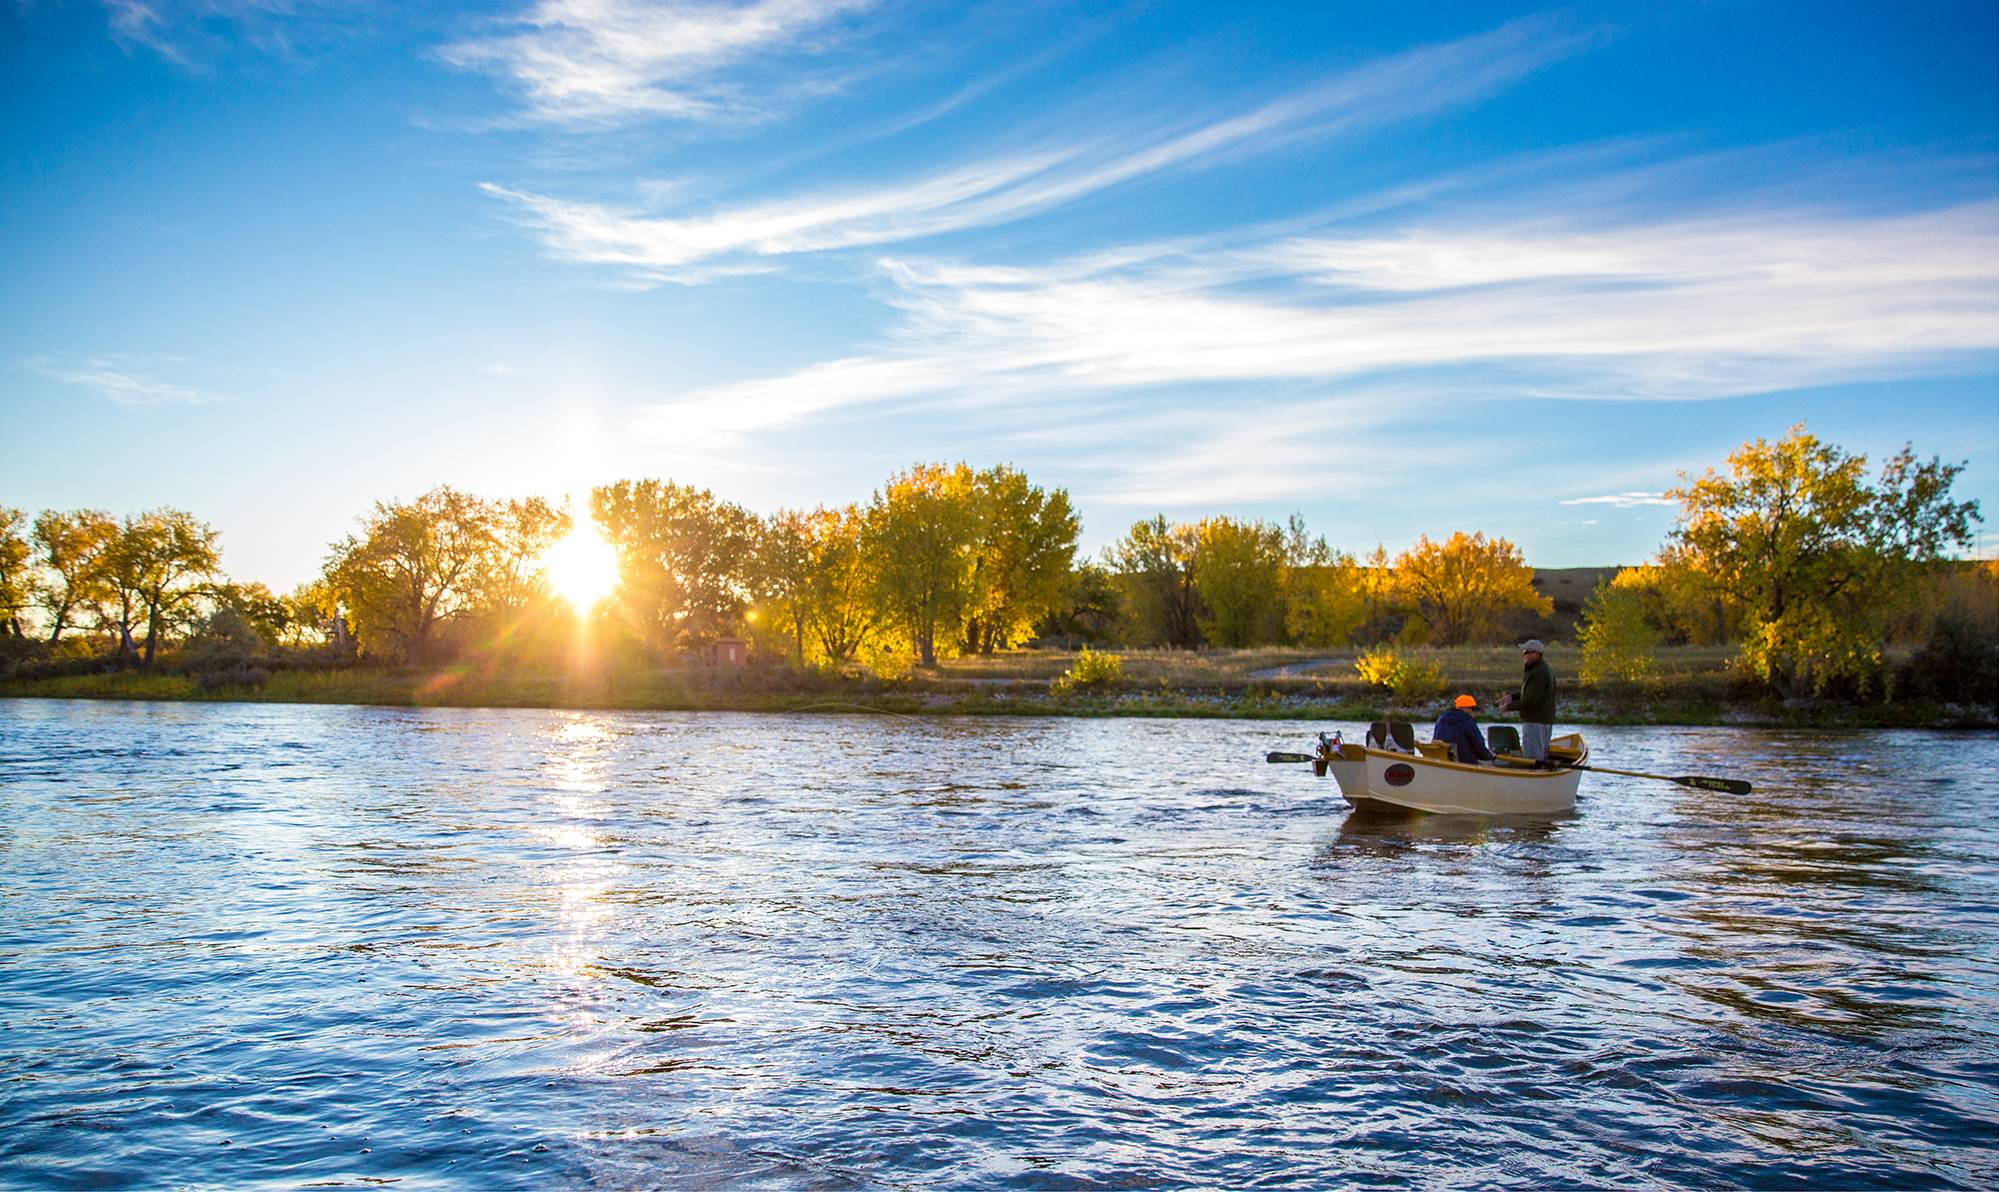 Fly Fishing the Bighorn River